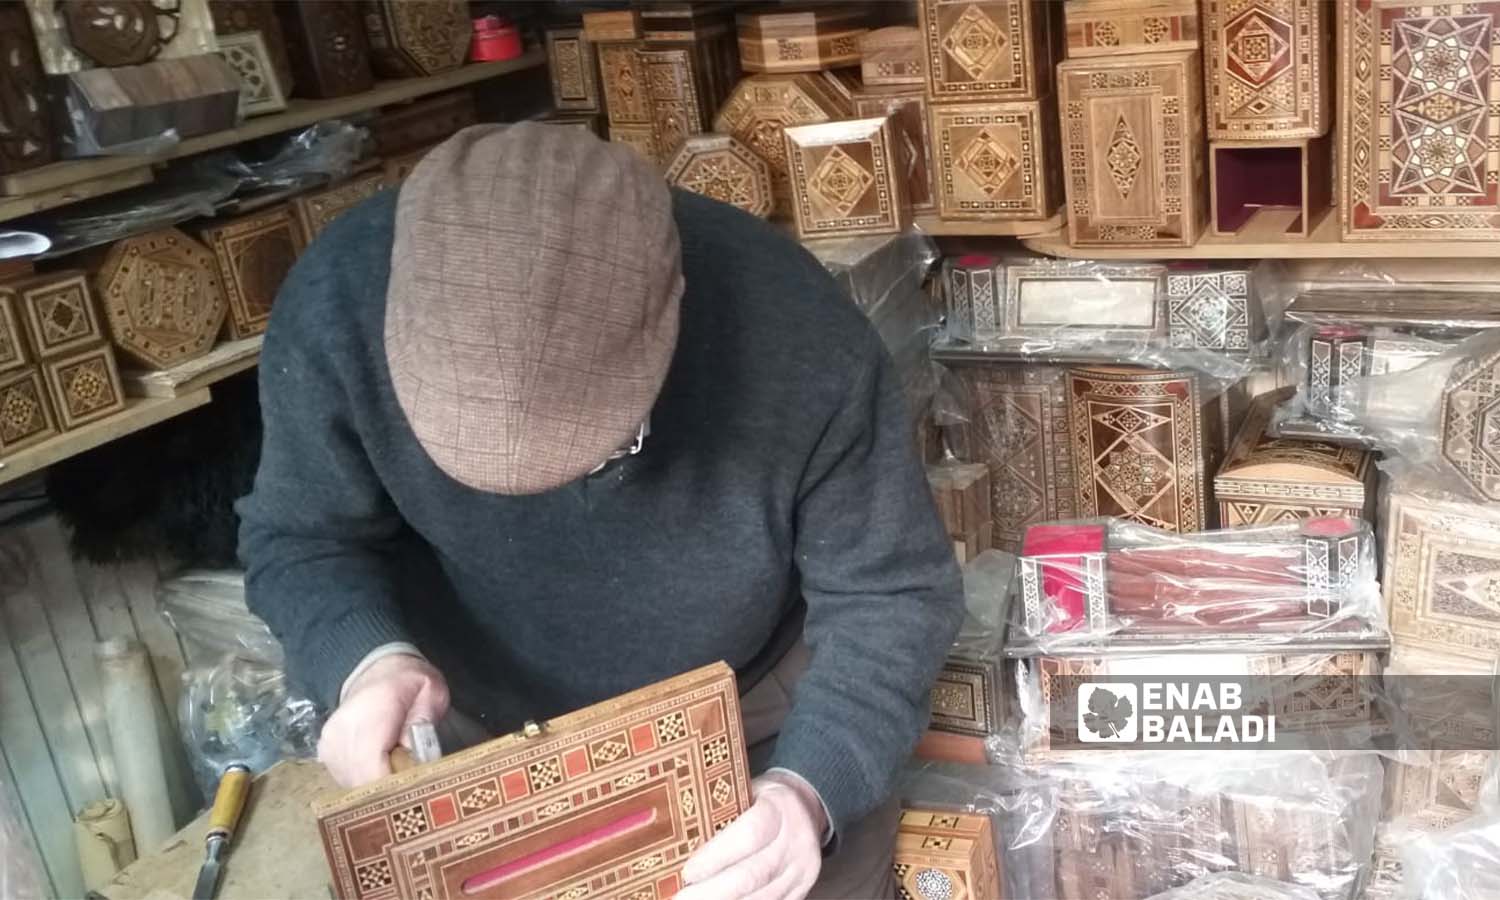 A mosaic craftsman working in the Midhat Pasha Souq in the Old City of Damascus (Enab Baladi - Hassan Hassan)